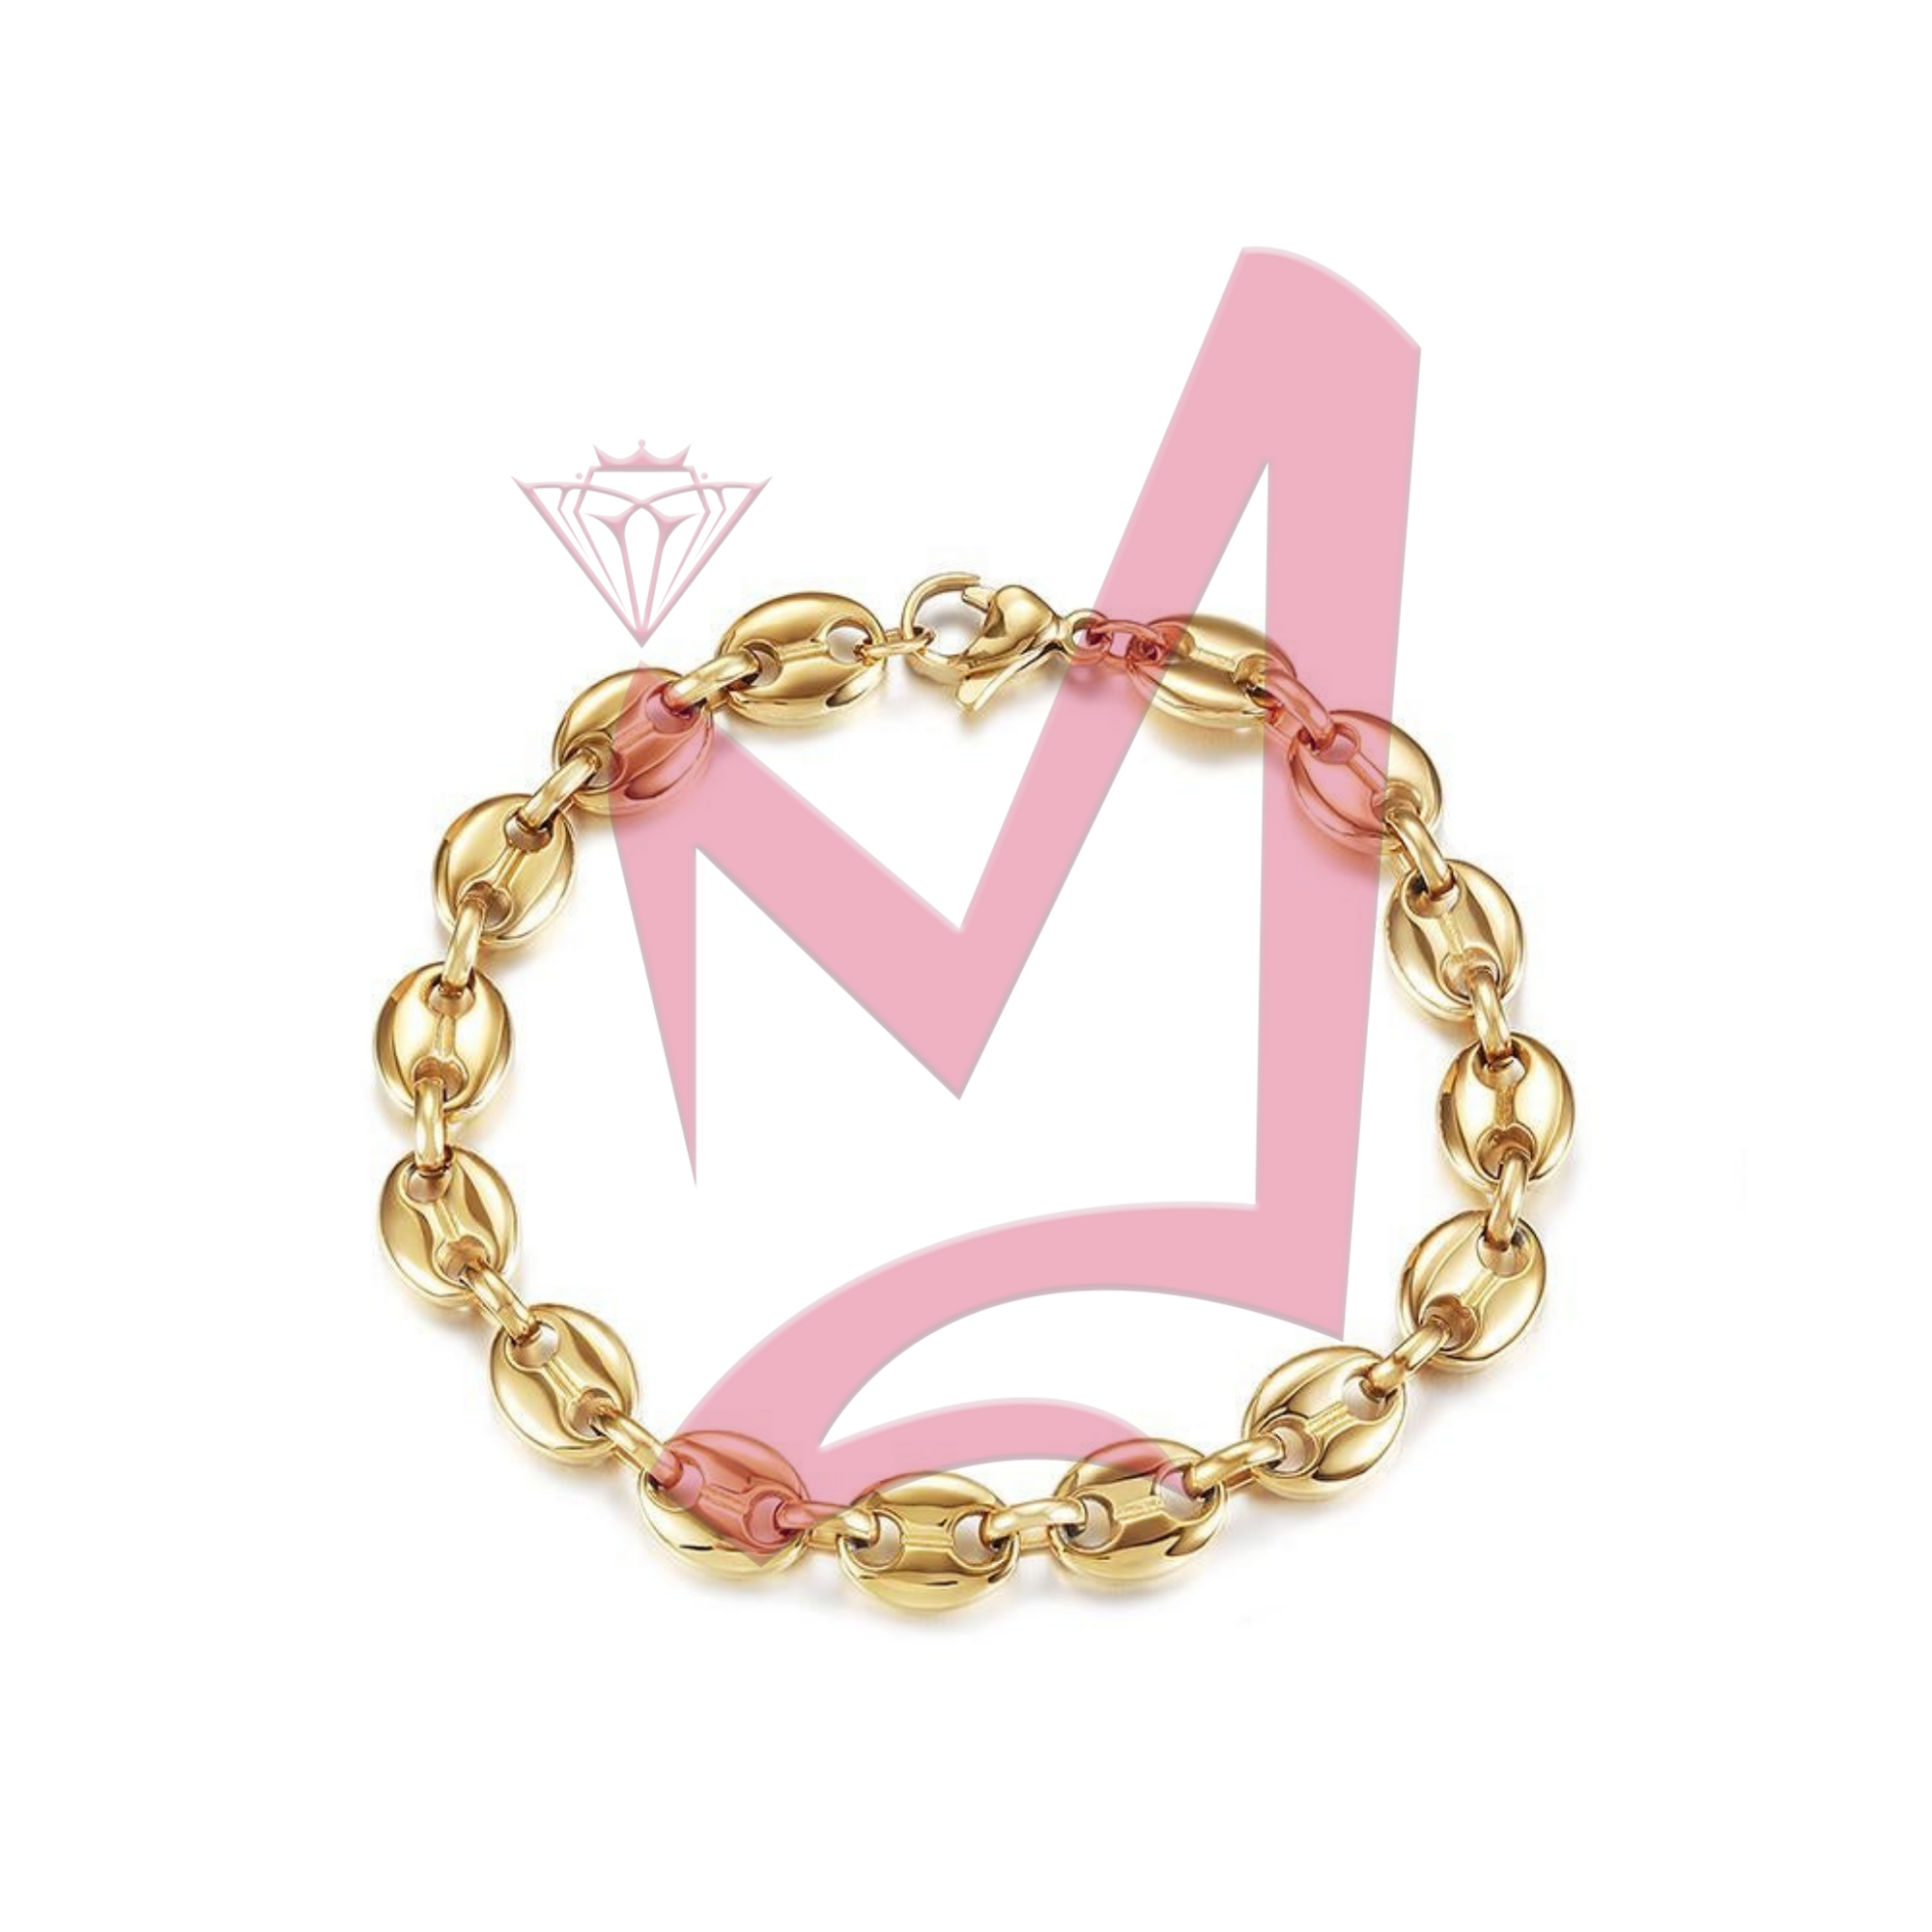 Coffee Bean Chain in 14K Plated Gold Bracelet